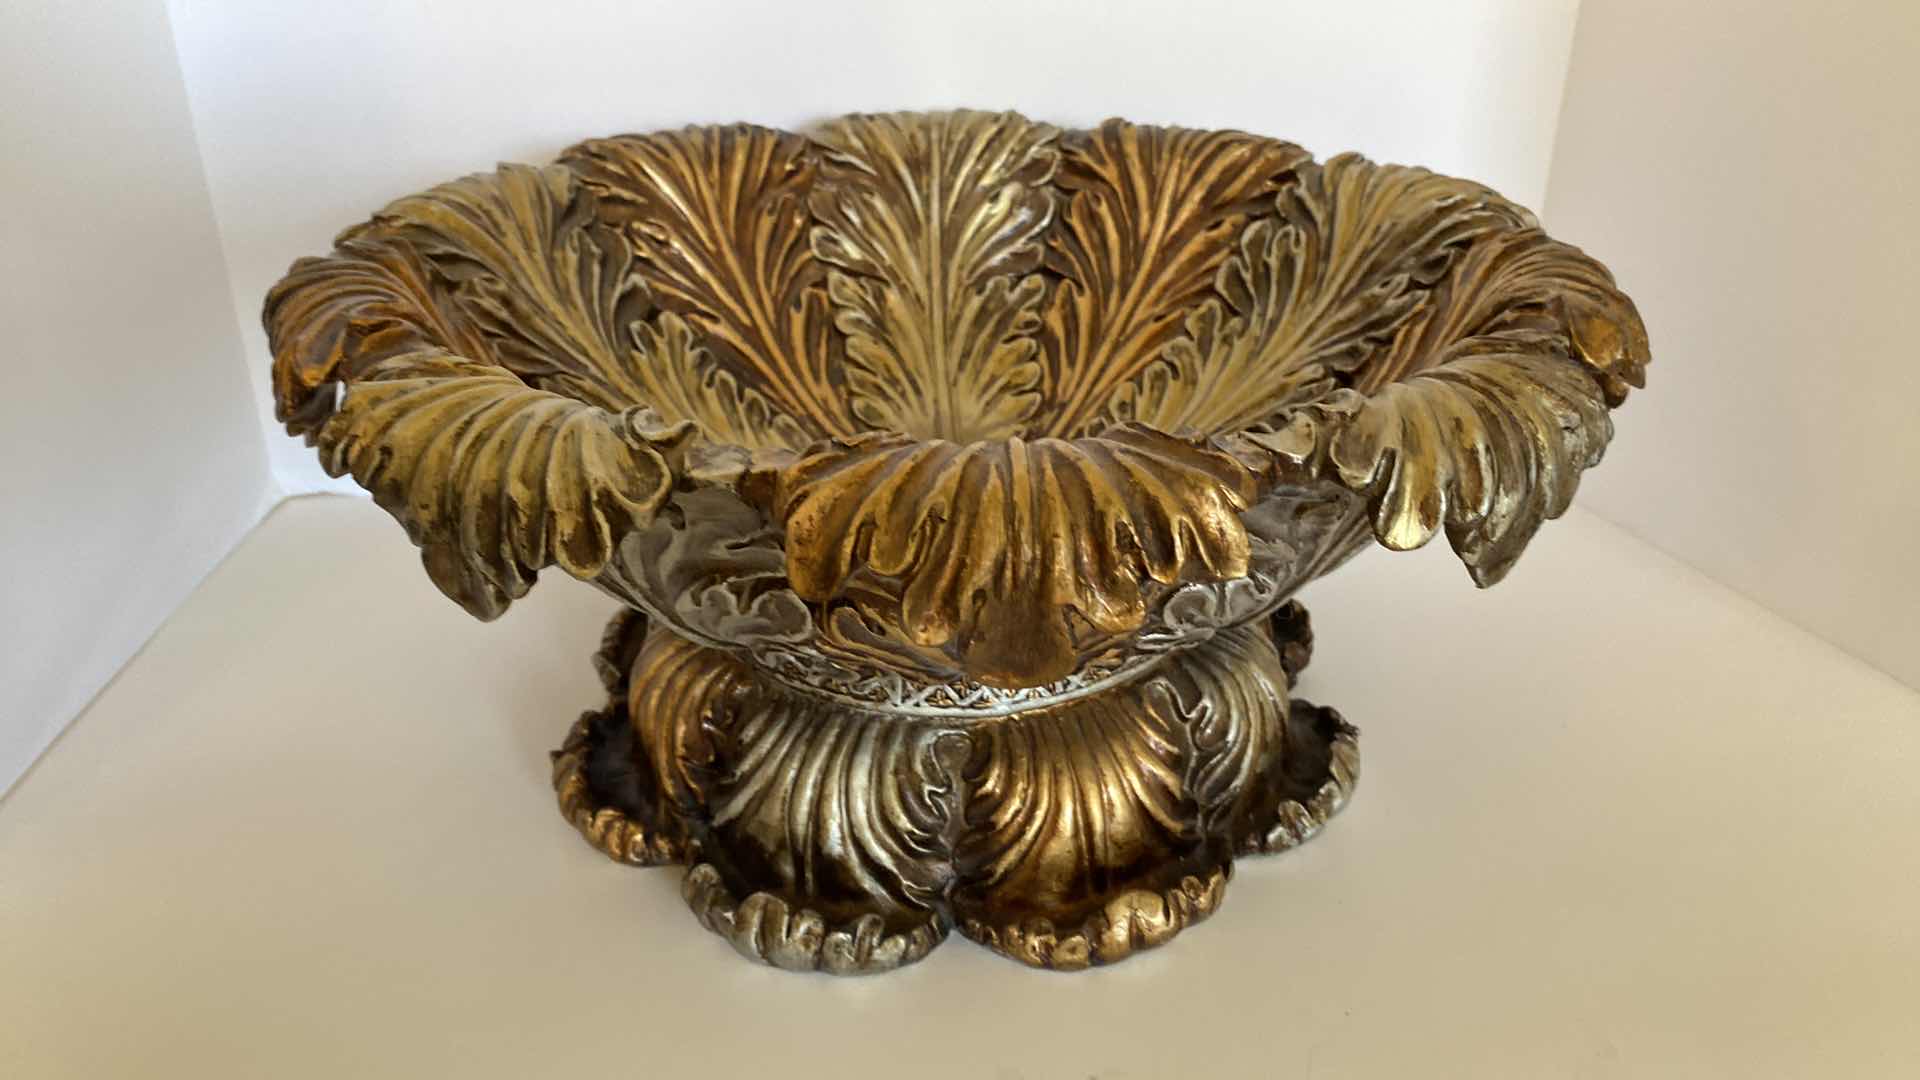 Photo 4 of LIFE STYLES HEAVY ACANTHUS LEAF VESSEL 16.5”